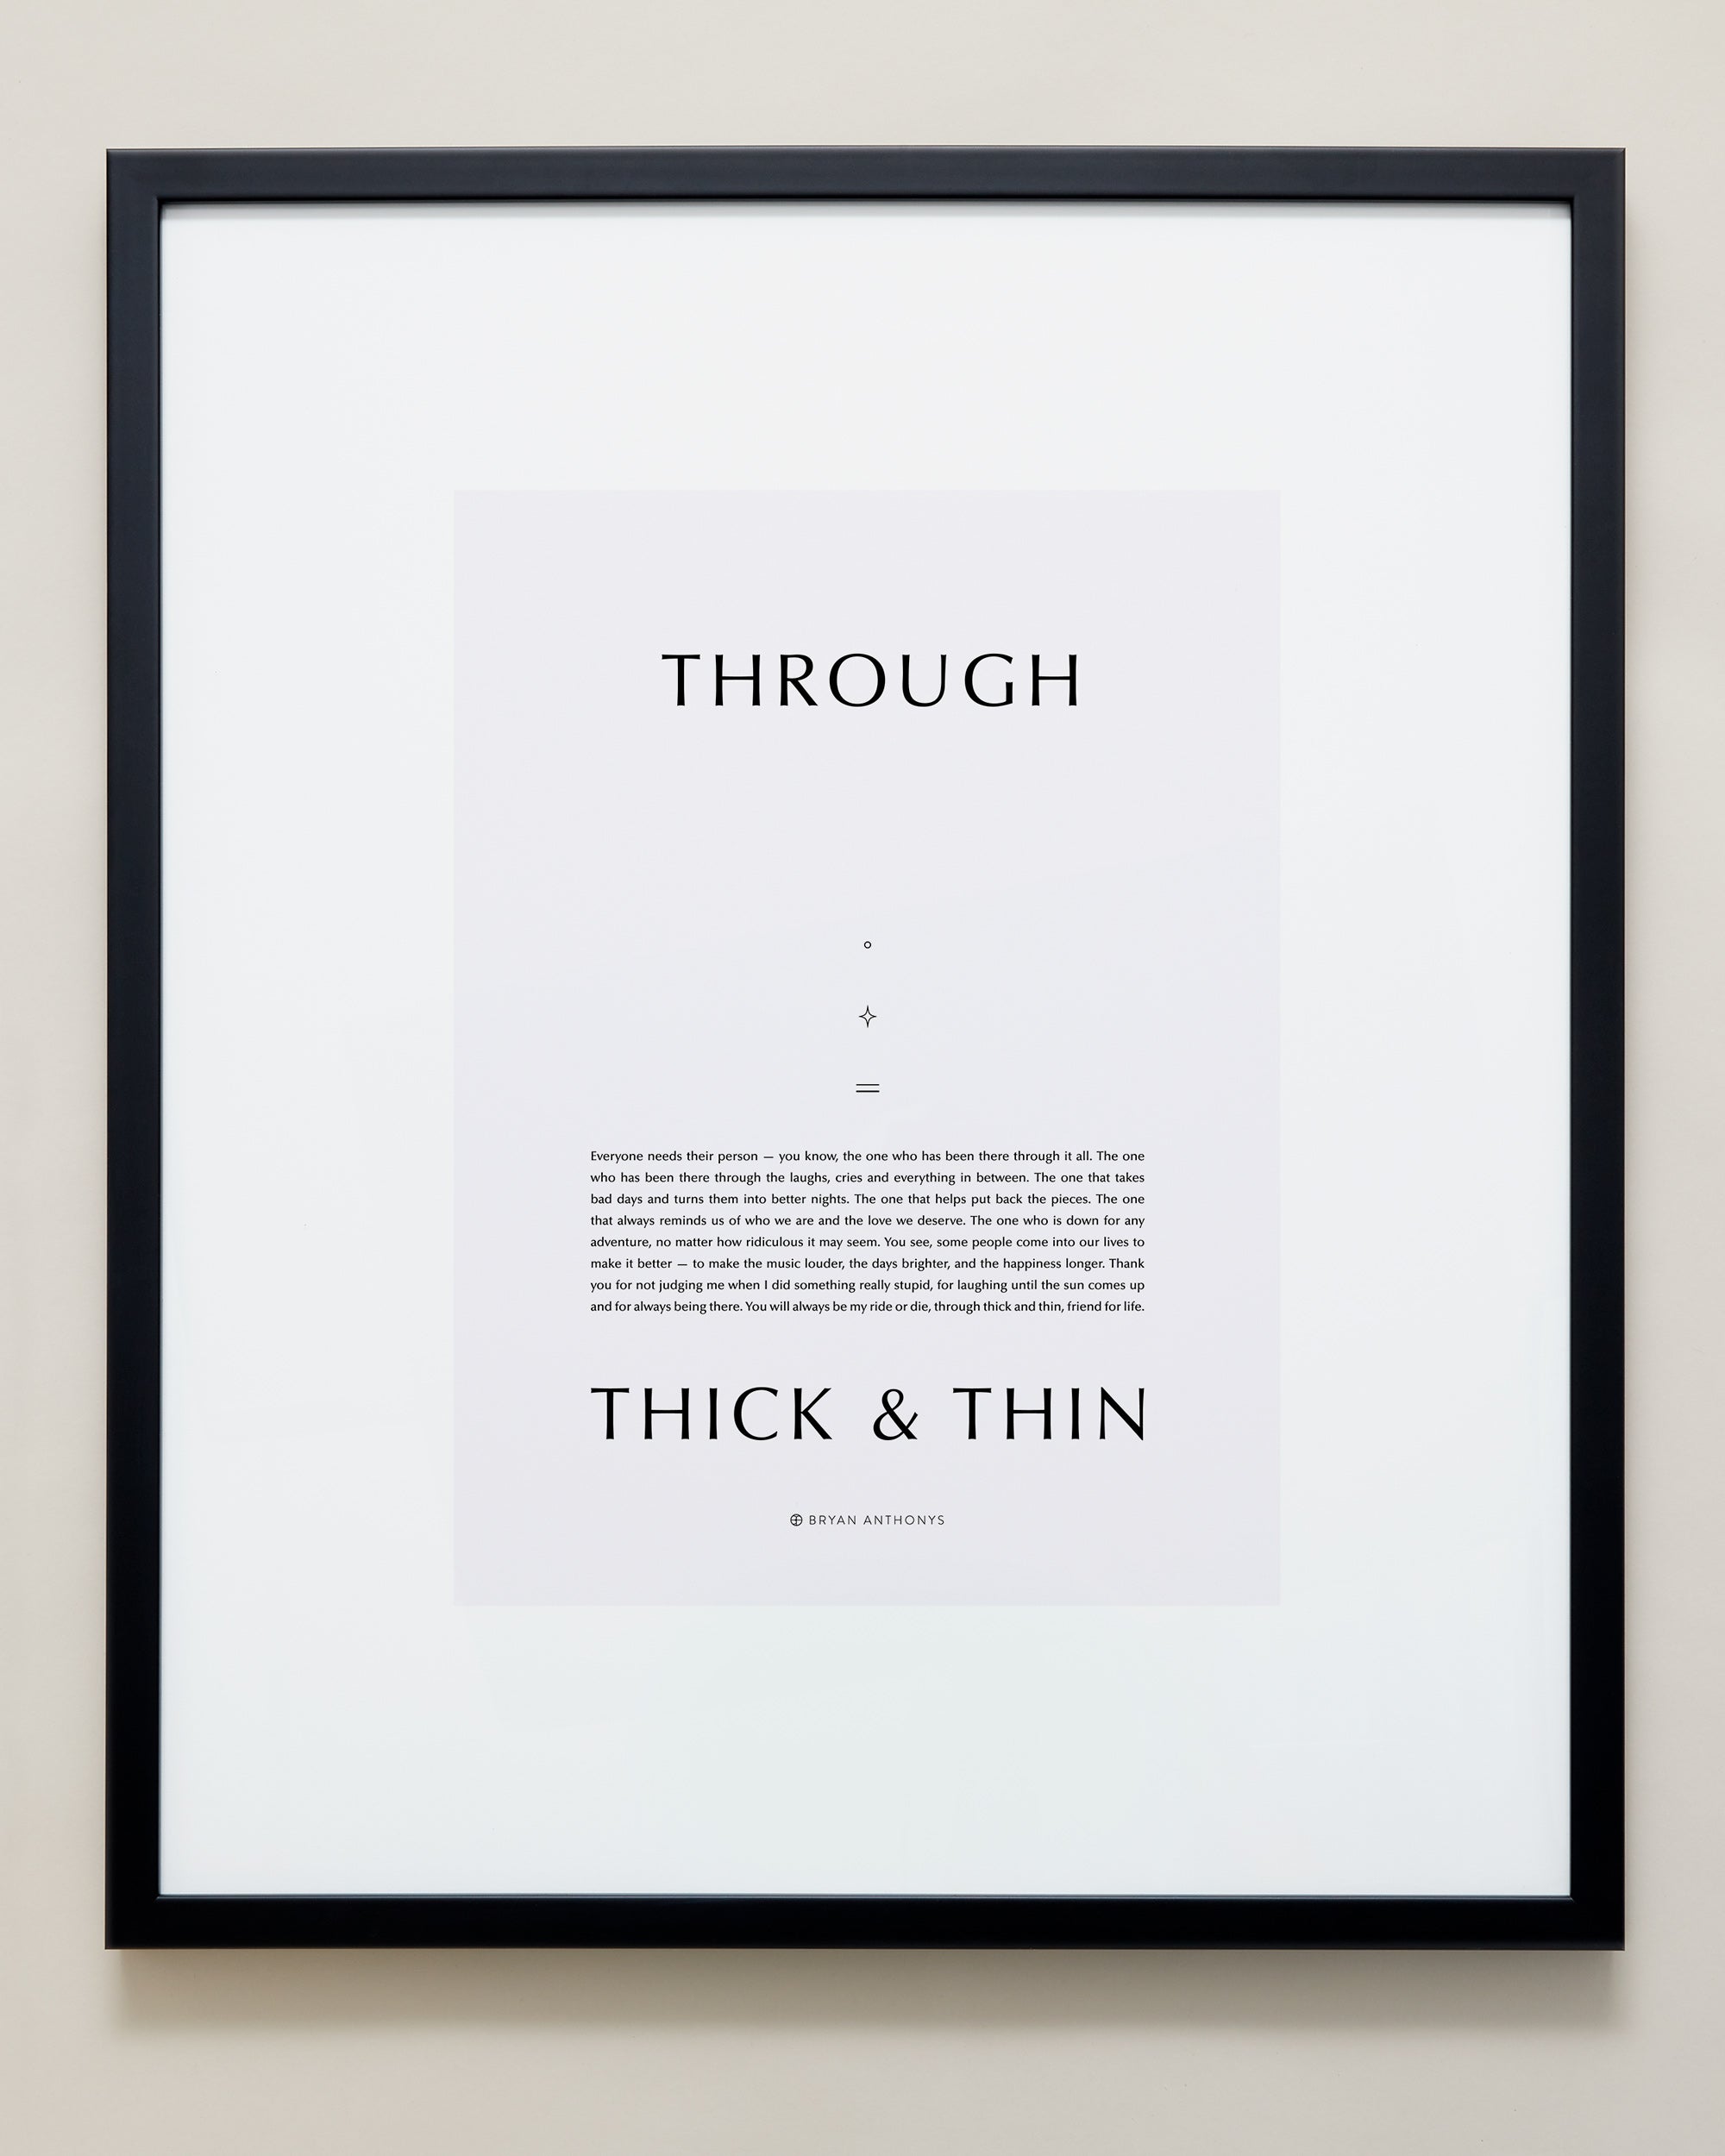 Bryan Anthonys Home Decor Through Thick and Thin Framed Print 20x24 Black with Gray